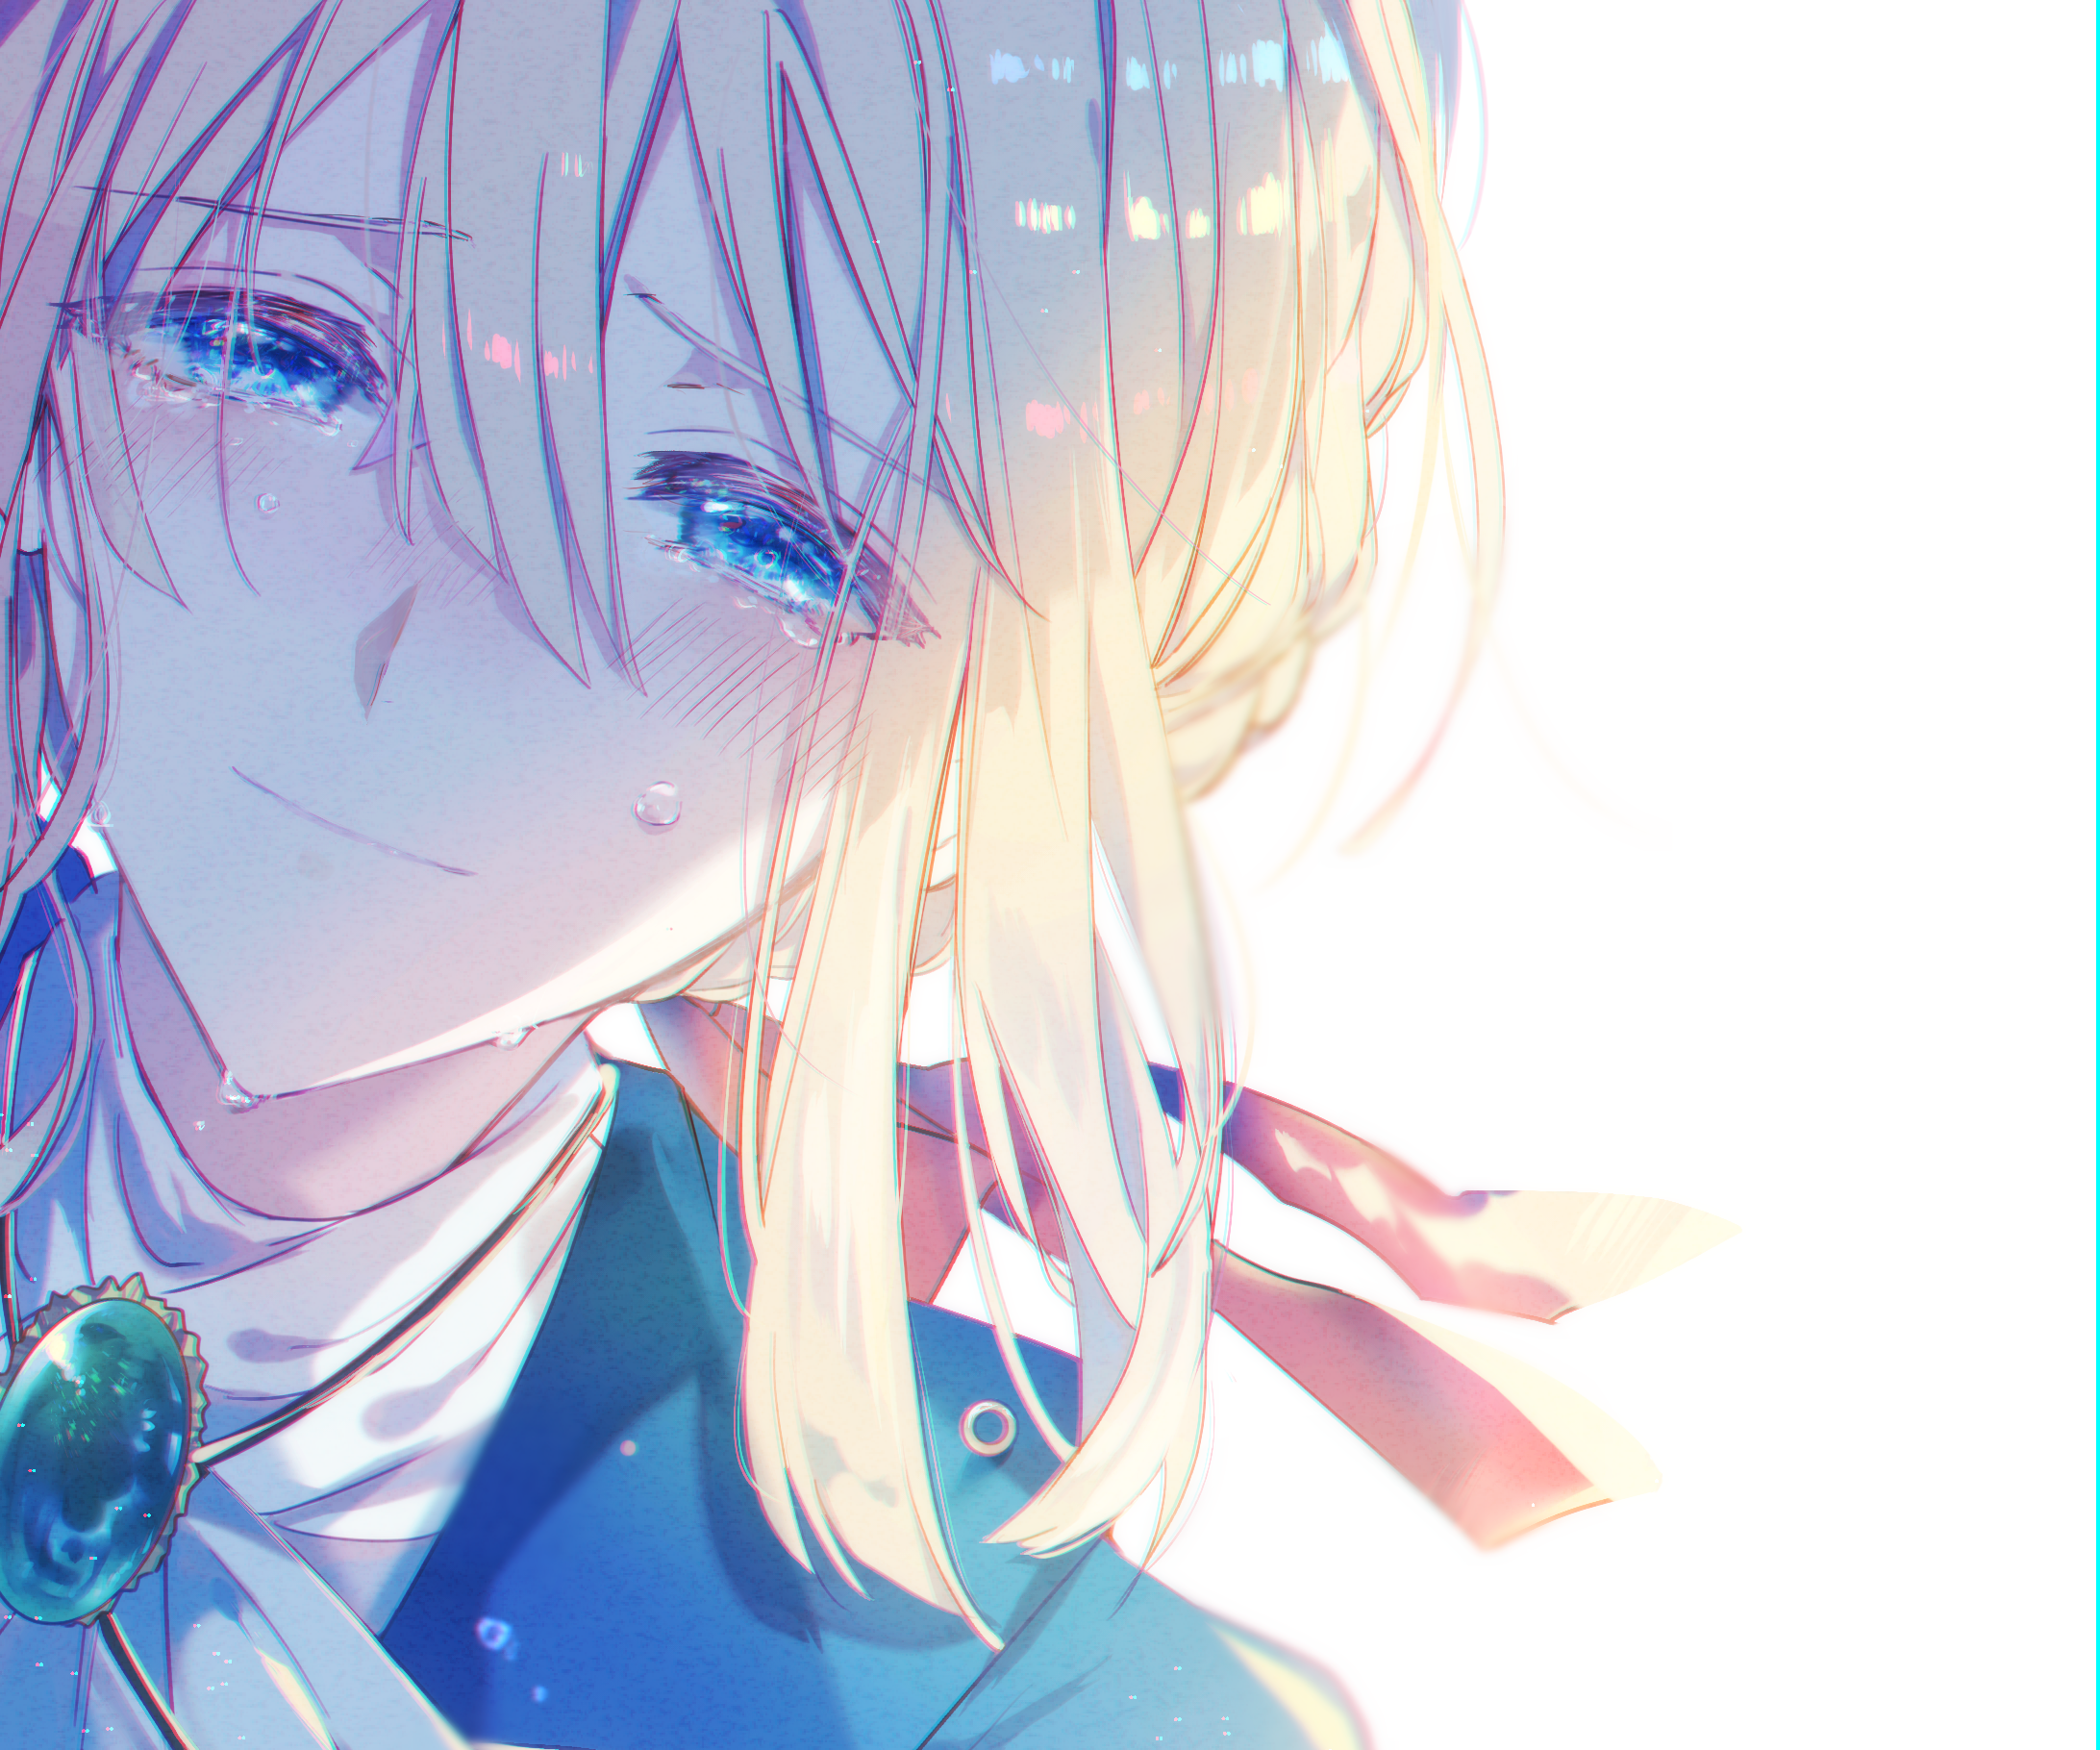 Violet Evergarden Character Crying 2184x1820